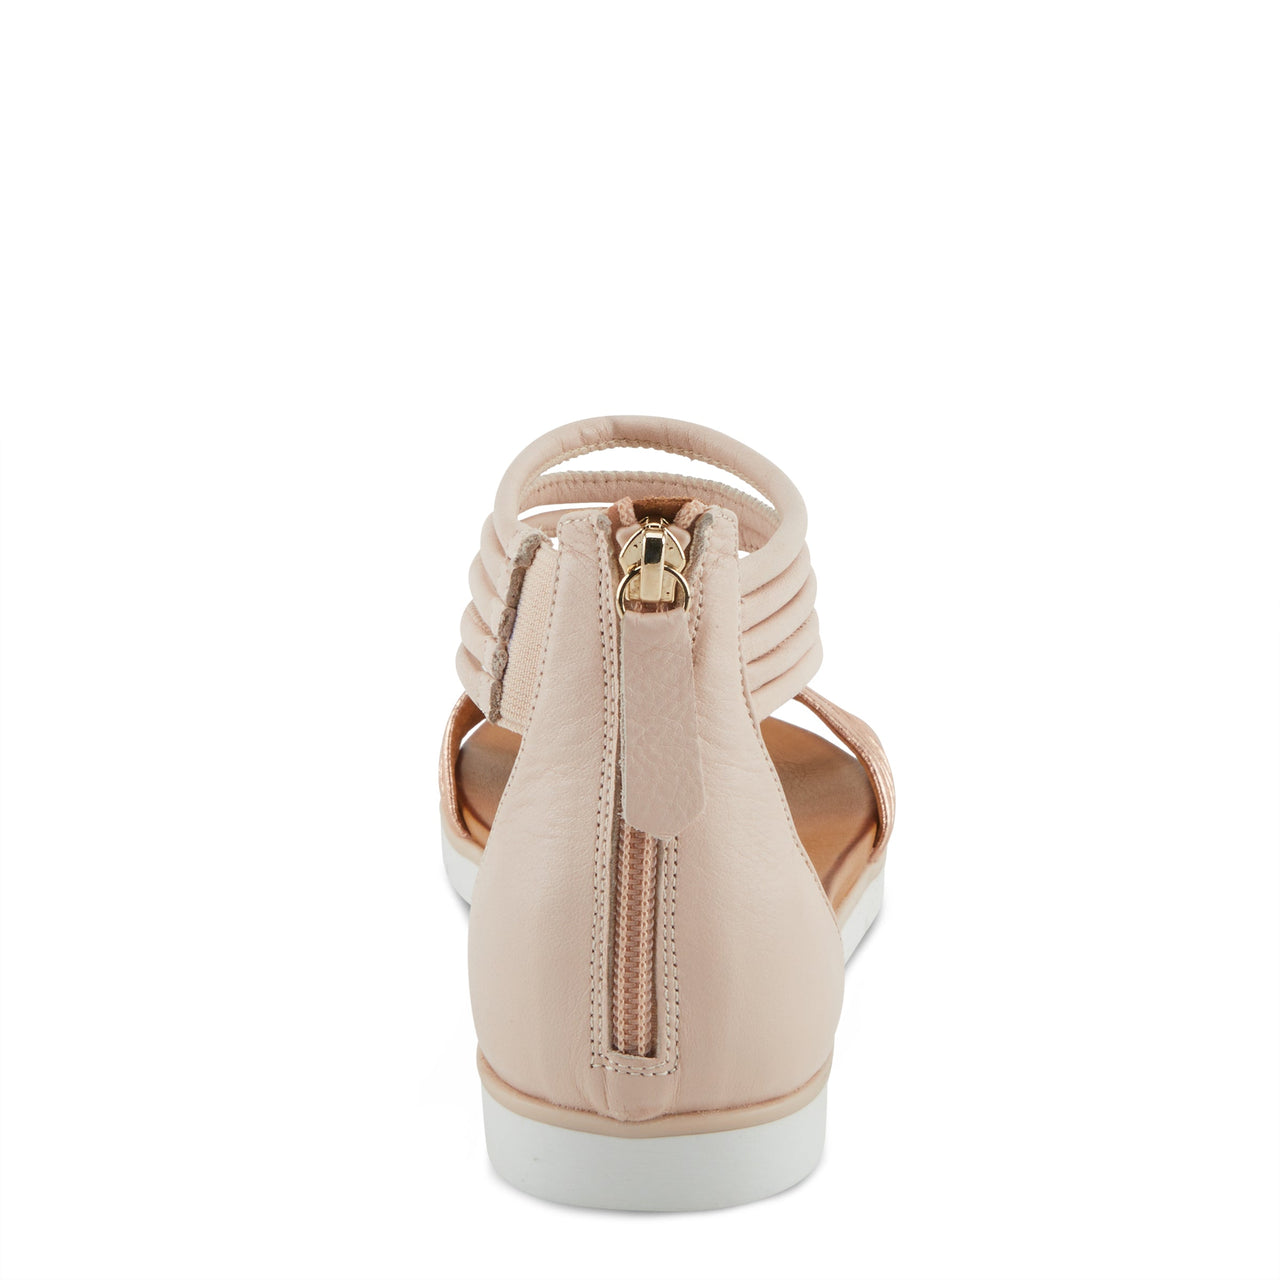 A close-up image of the Spring Step Mexa Sandals in light brown, featuring a stylish open-toe design with crisscross straps and a comfortable wedge heel